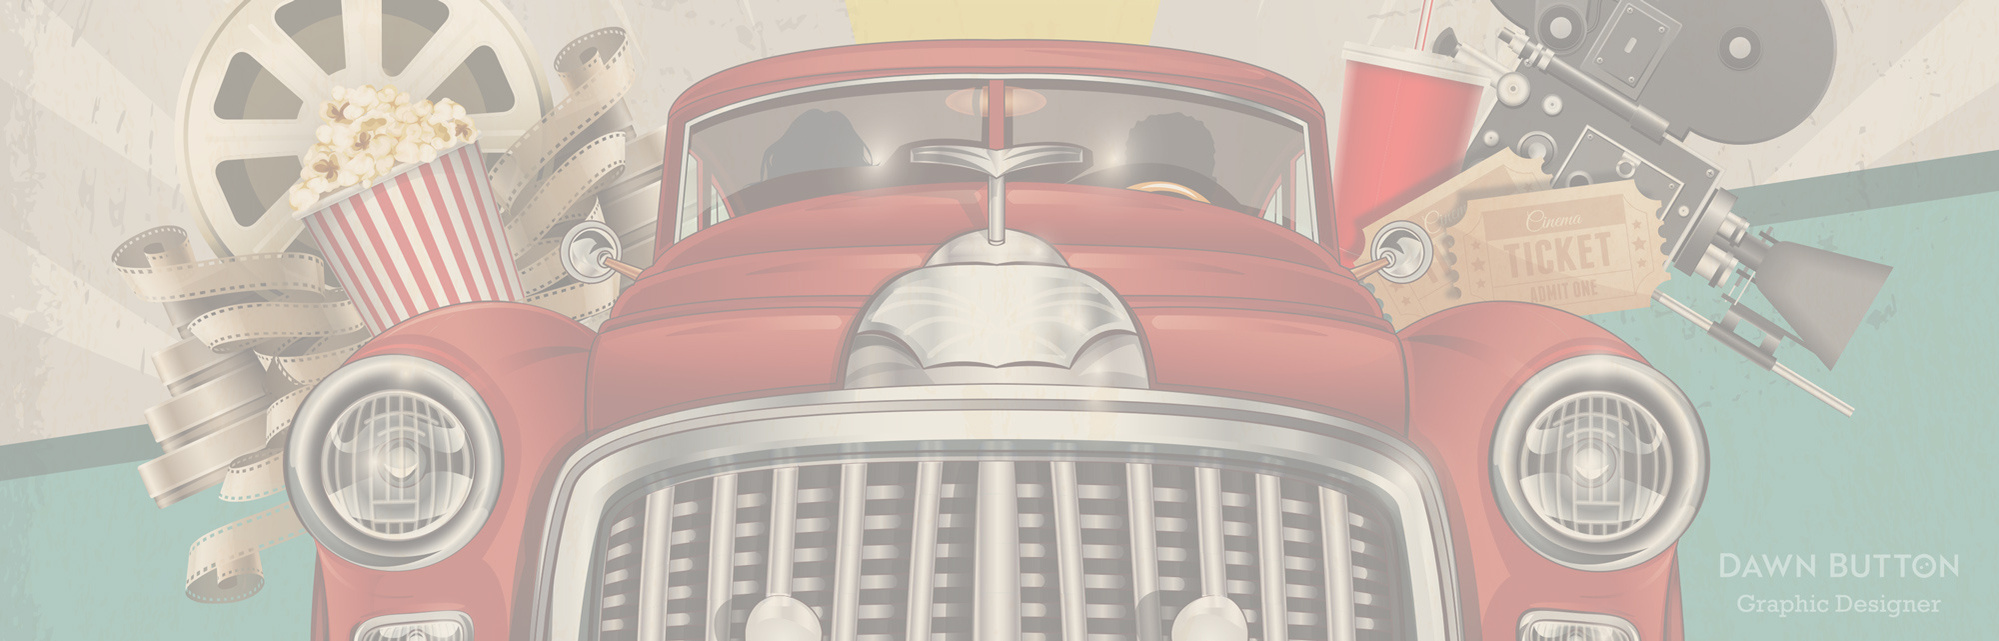 Button Graphic Design - detail of a Drive-In poster designed by Dawn Button